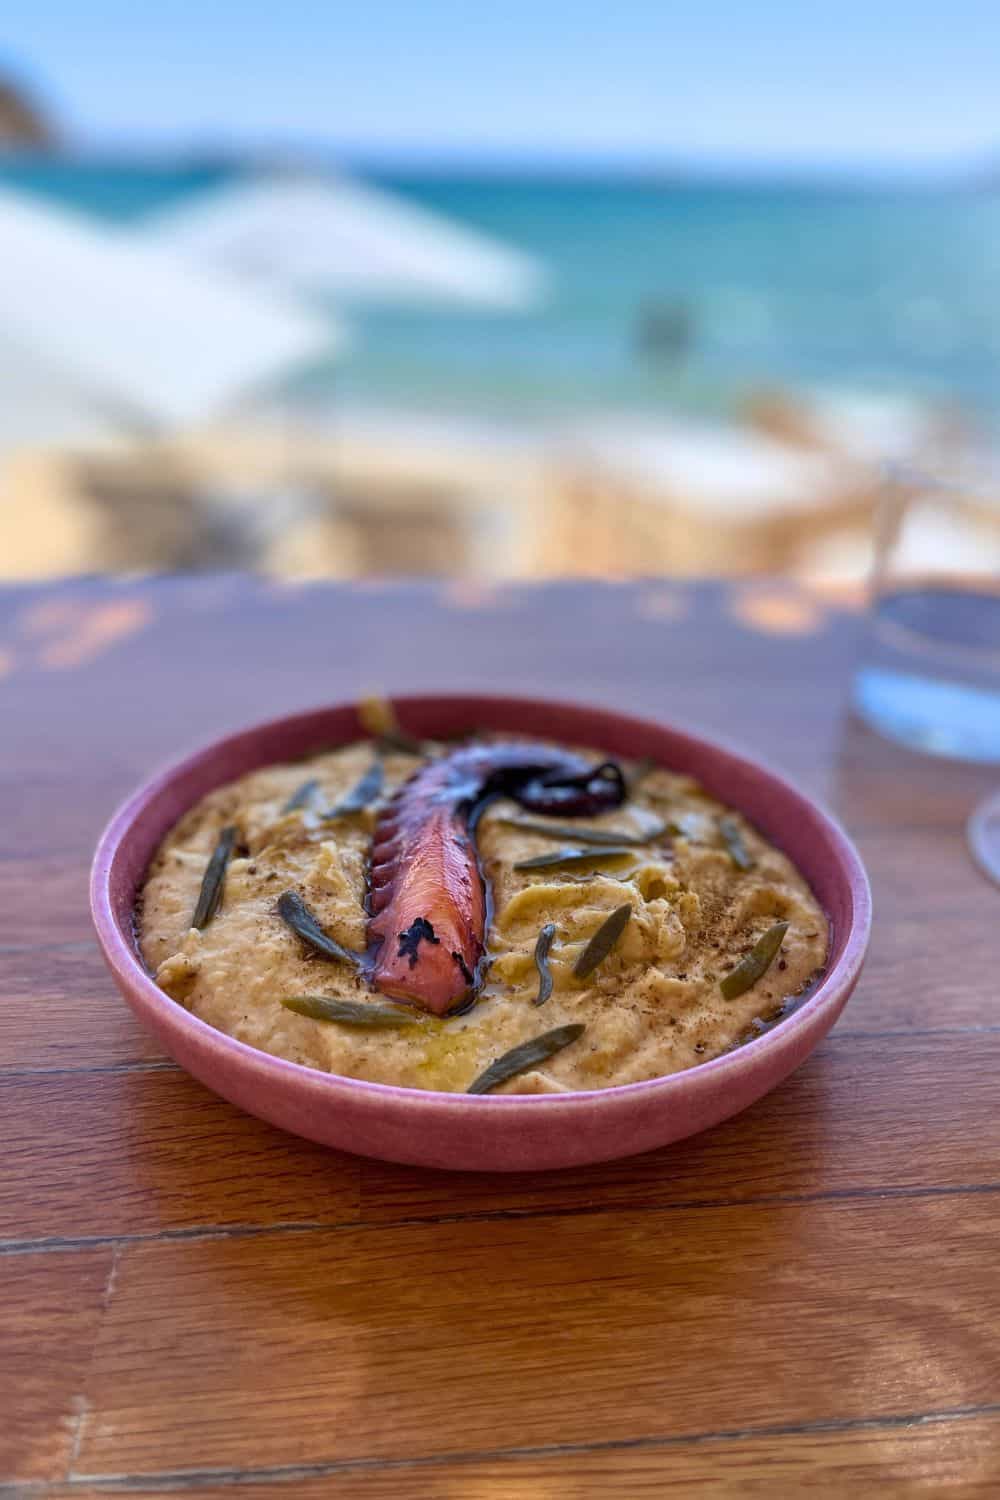 A close-up of a rustic, terracotta bowl filled with a creamy dip topped with a grilled pepper, set against a blurred backdrop of a sunlit beach and azure waters.